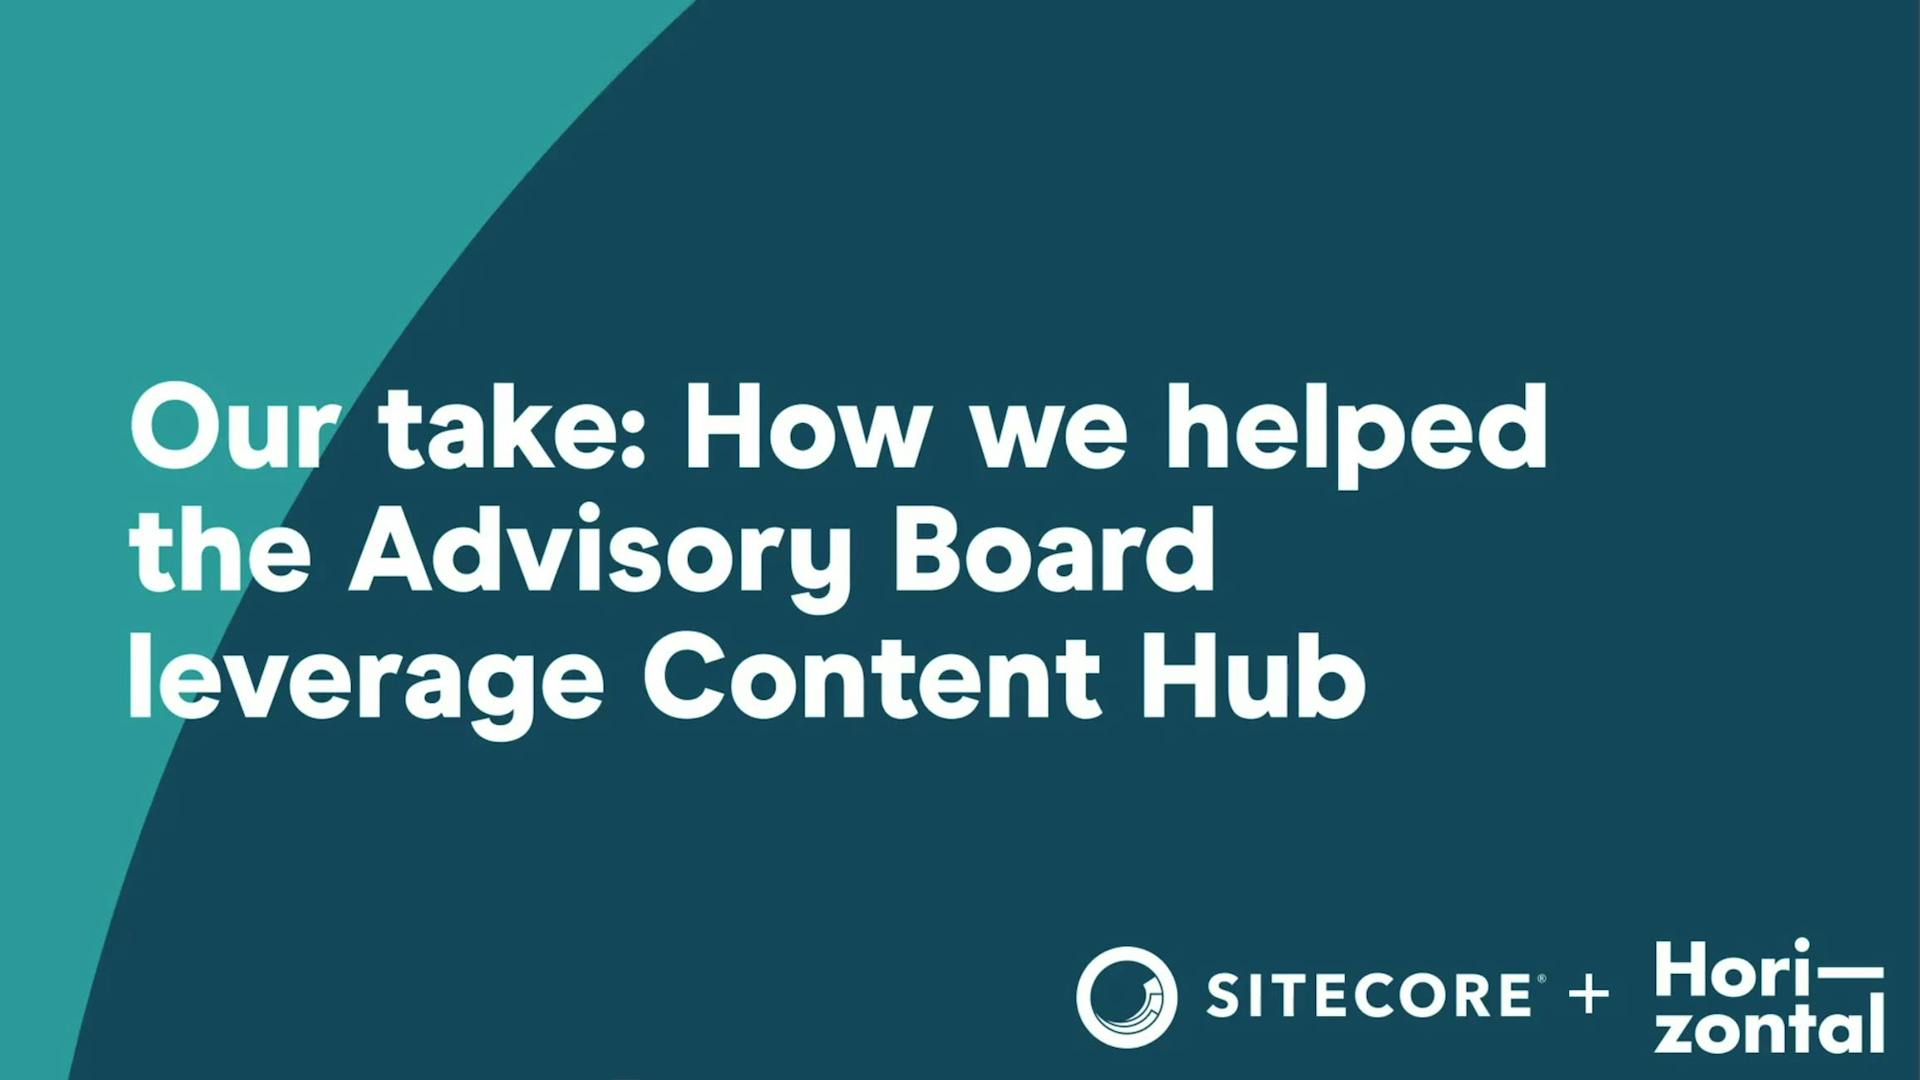 Our take: How we helped the Advisory Board leverage Content Hub